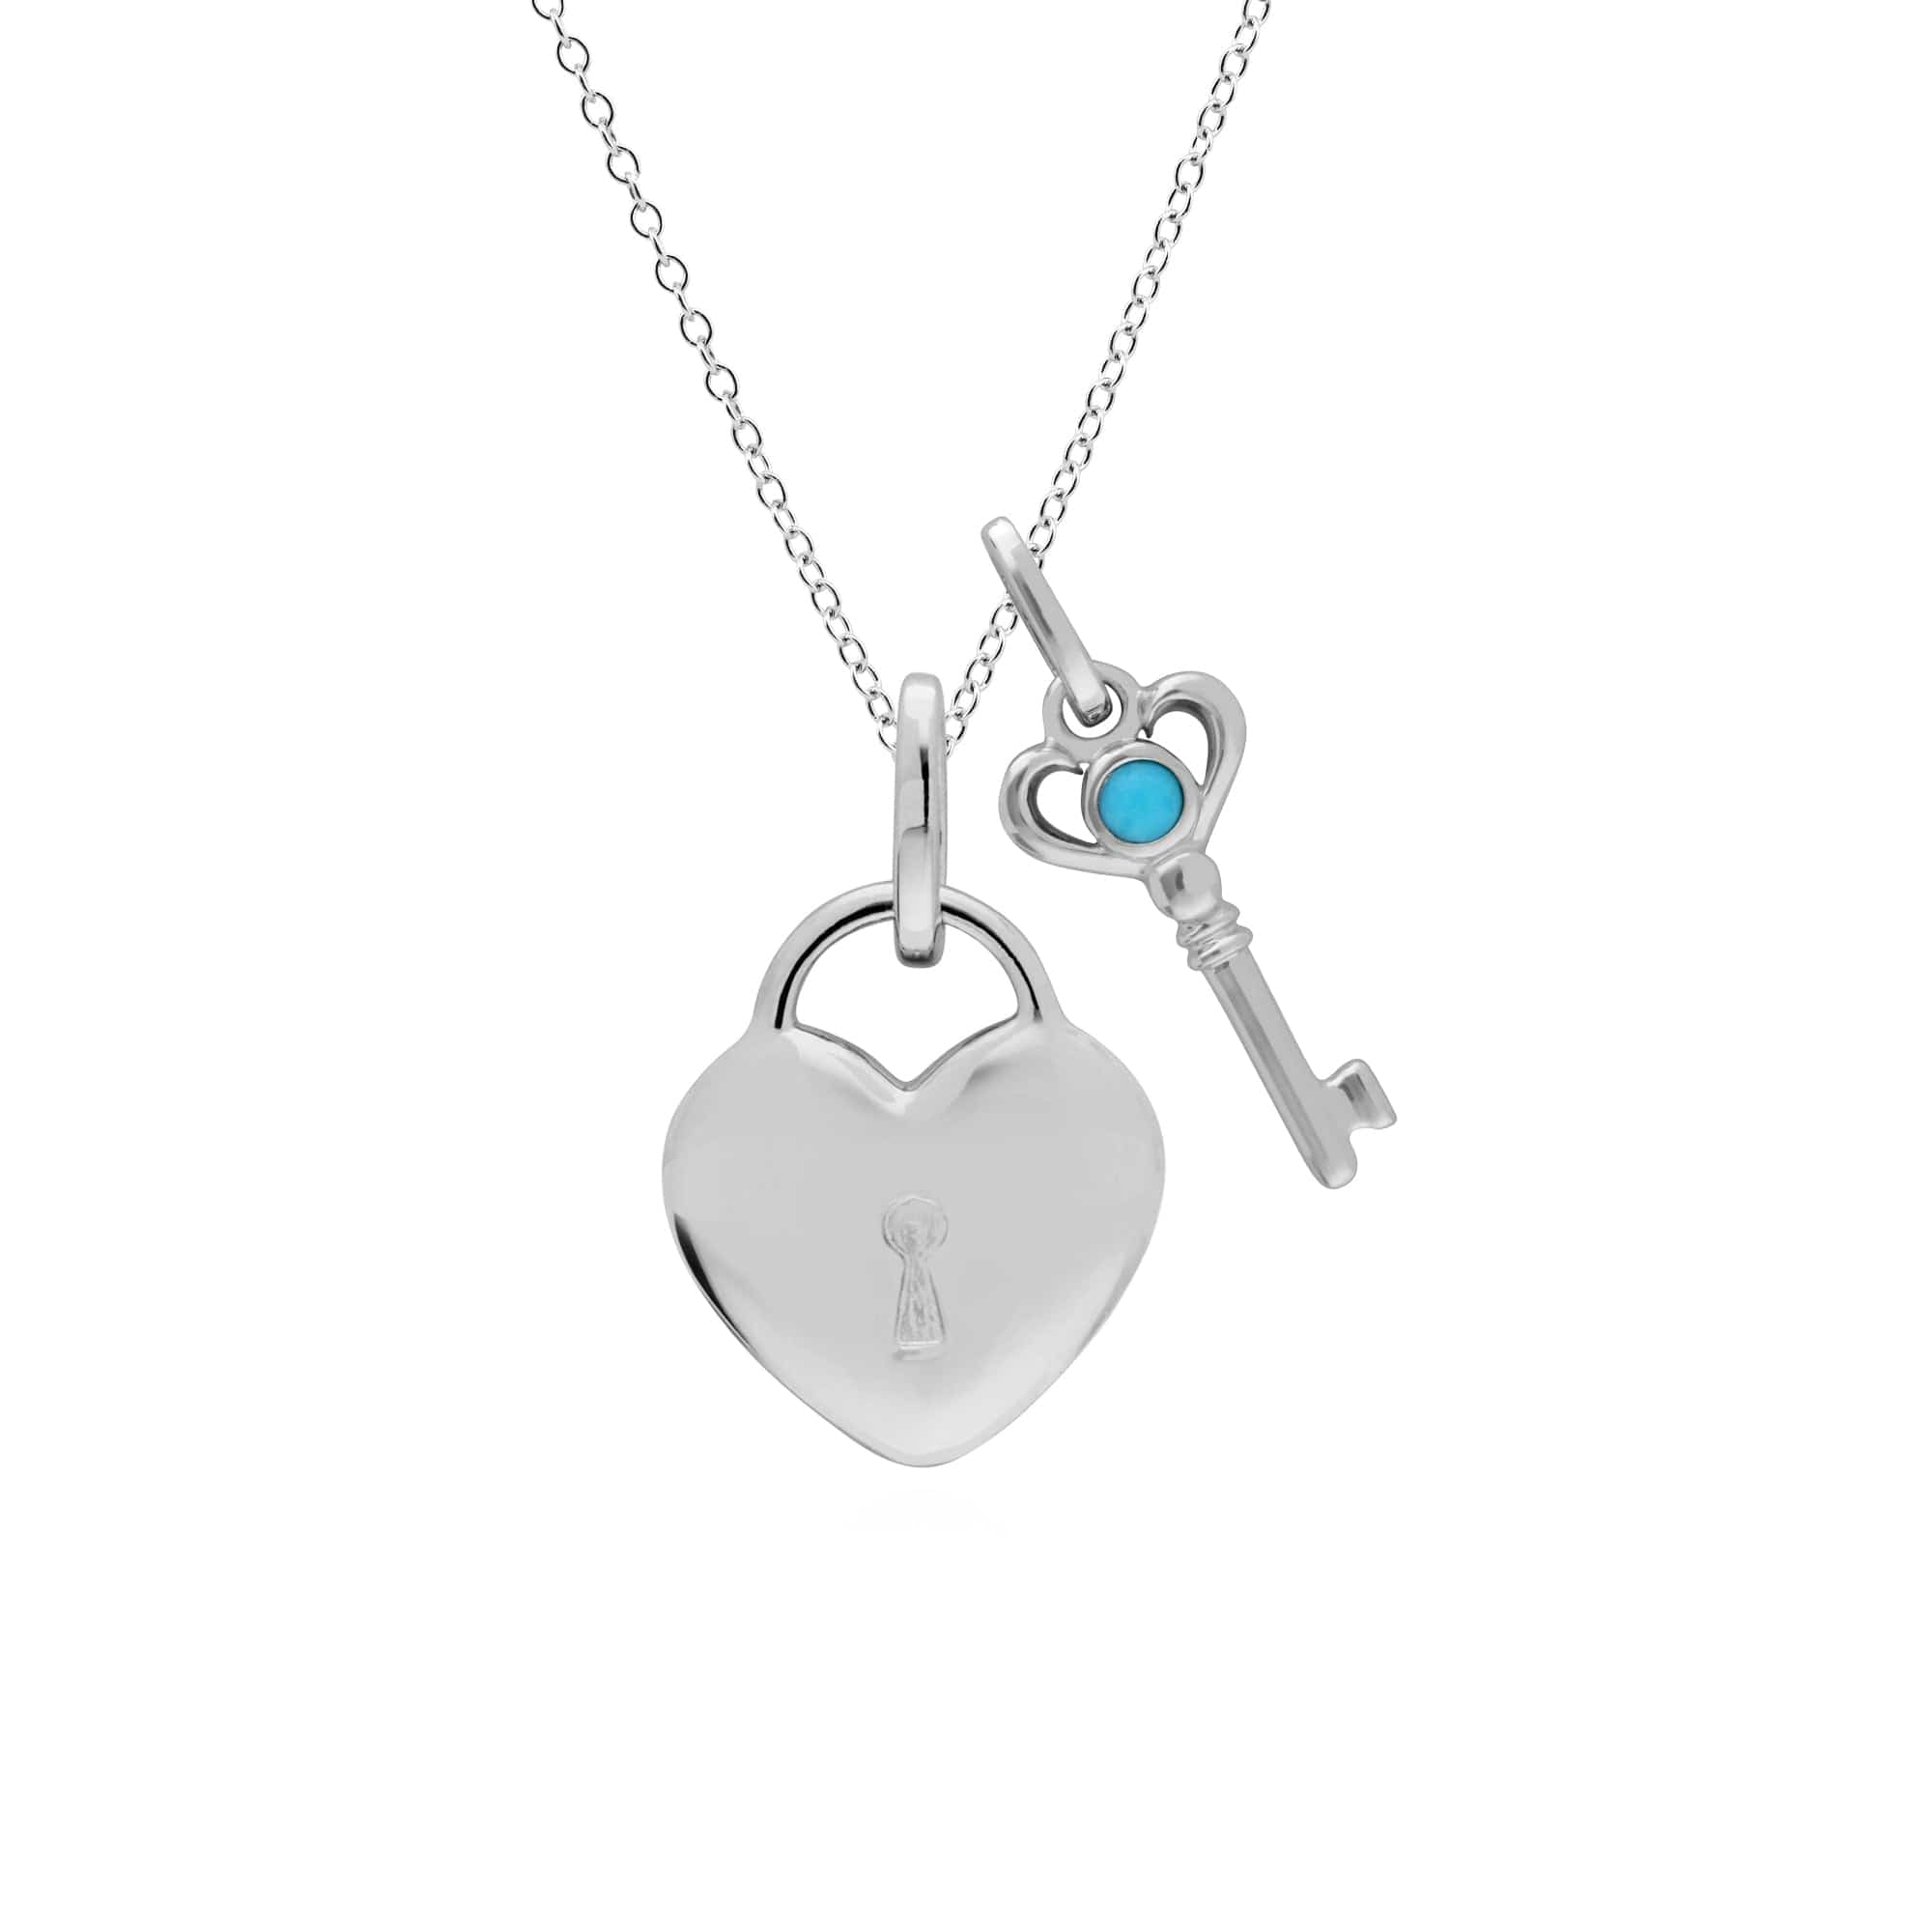 270P028301925-270P027001925 Classic Heart Lock Pendant & Turquoise Key Charm in 925 Sterling Silver 1